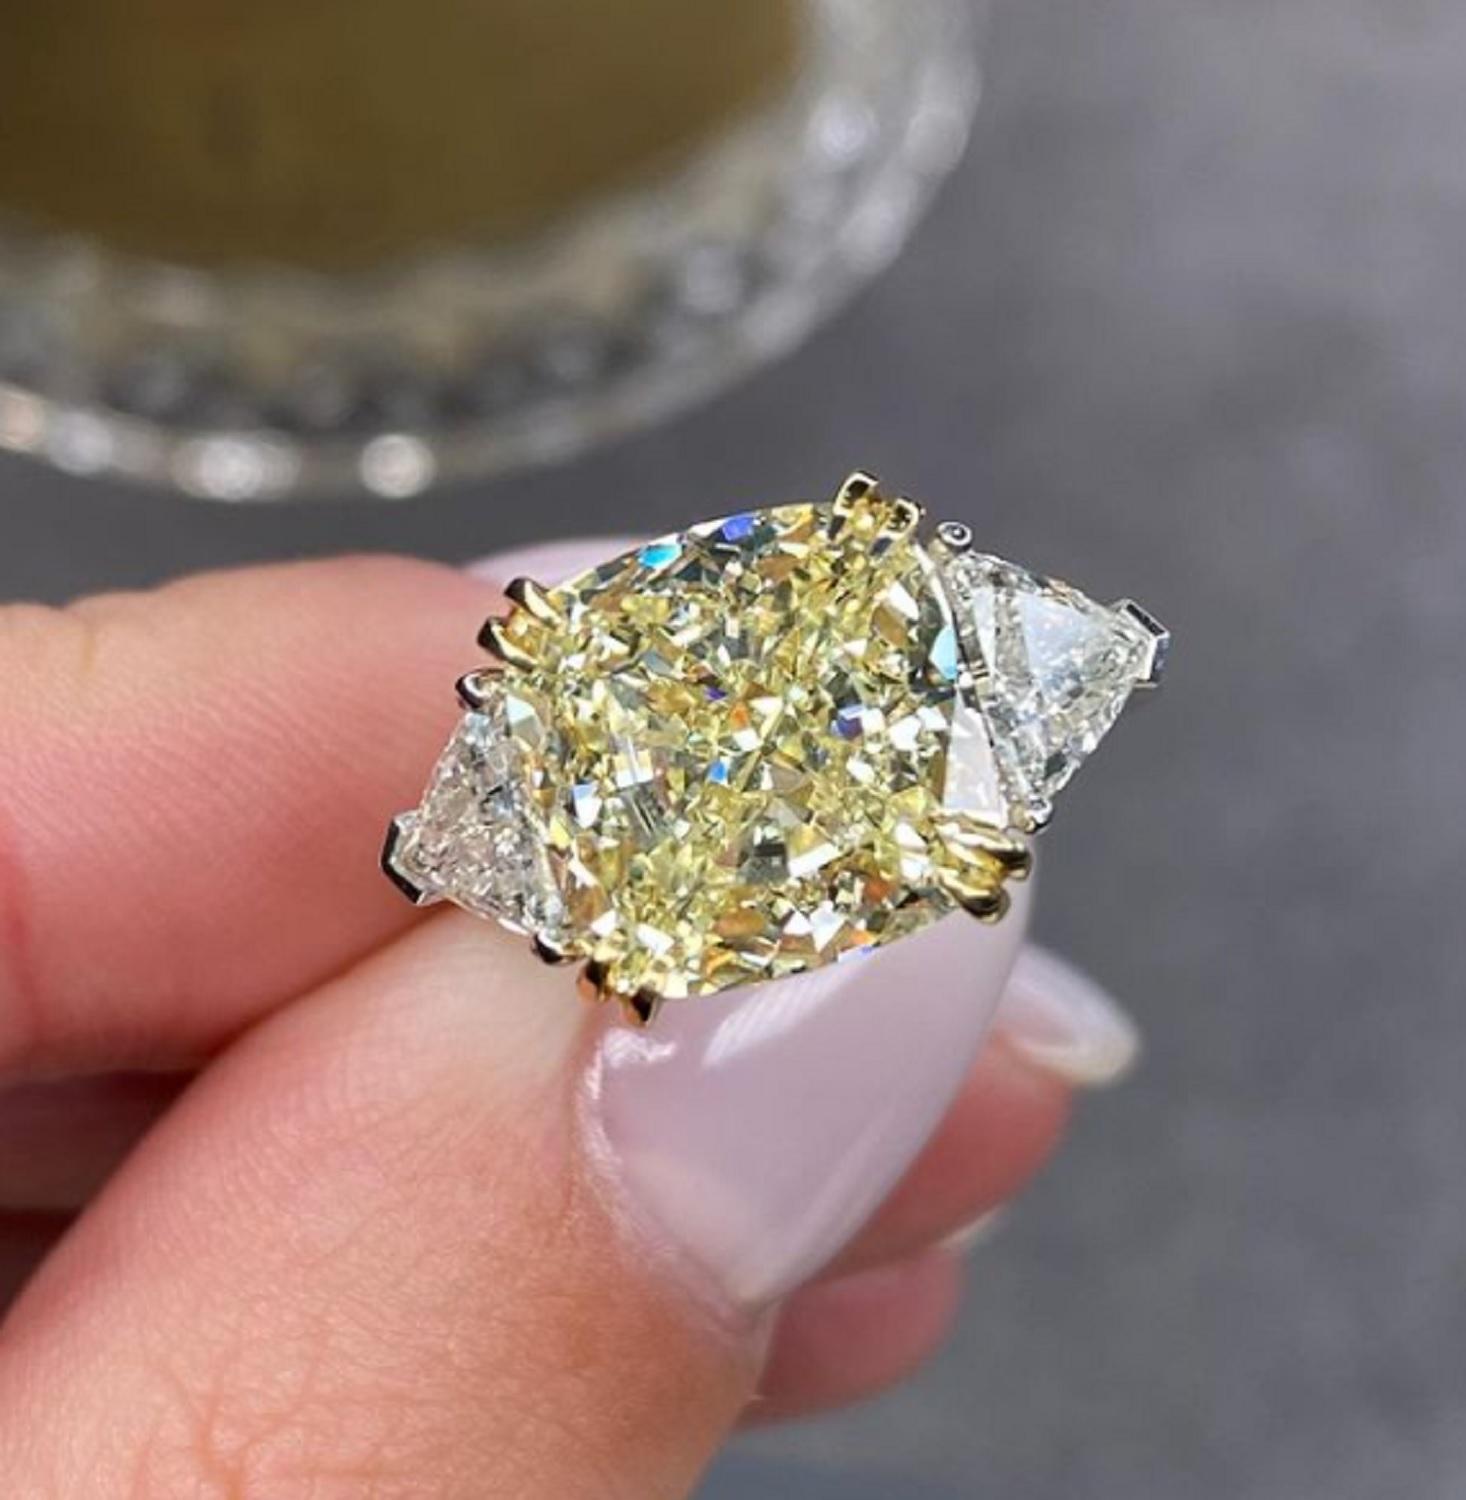 GIA Certified 4 Carat Fancy Light Yellow Cushion Three Stone Diamond Ring
The main stone is a 4 carat amazing fancy yellow diamond with great luster performance and tone!